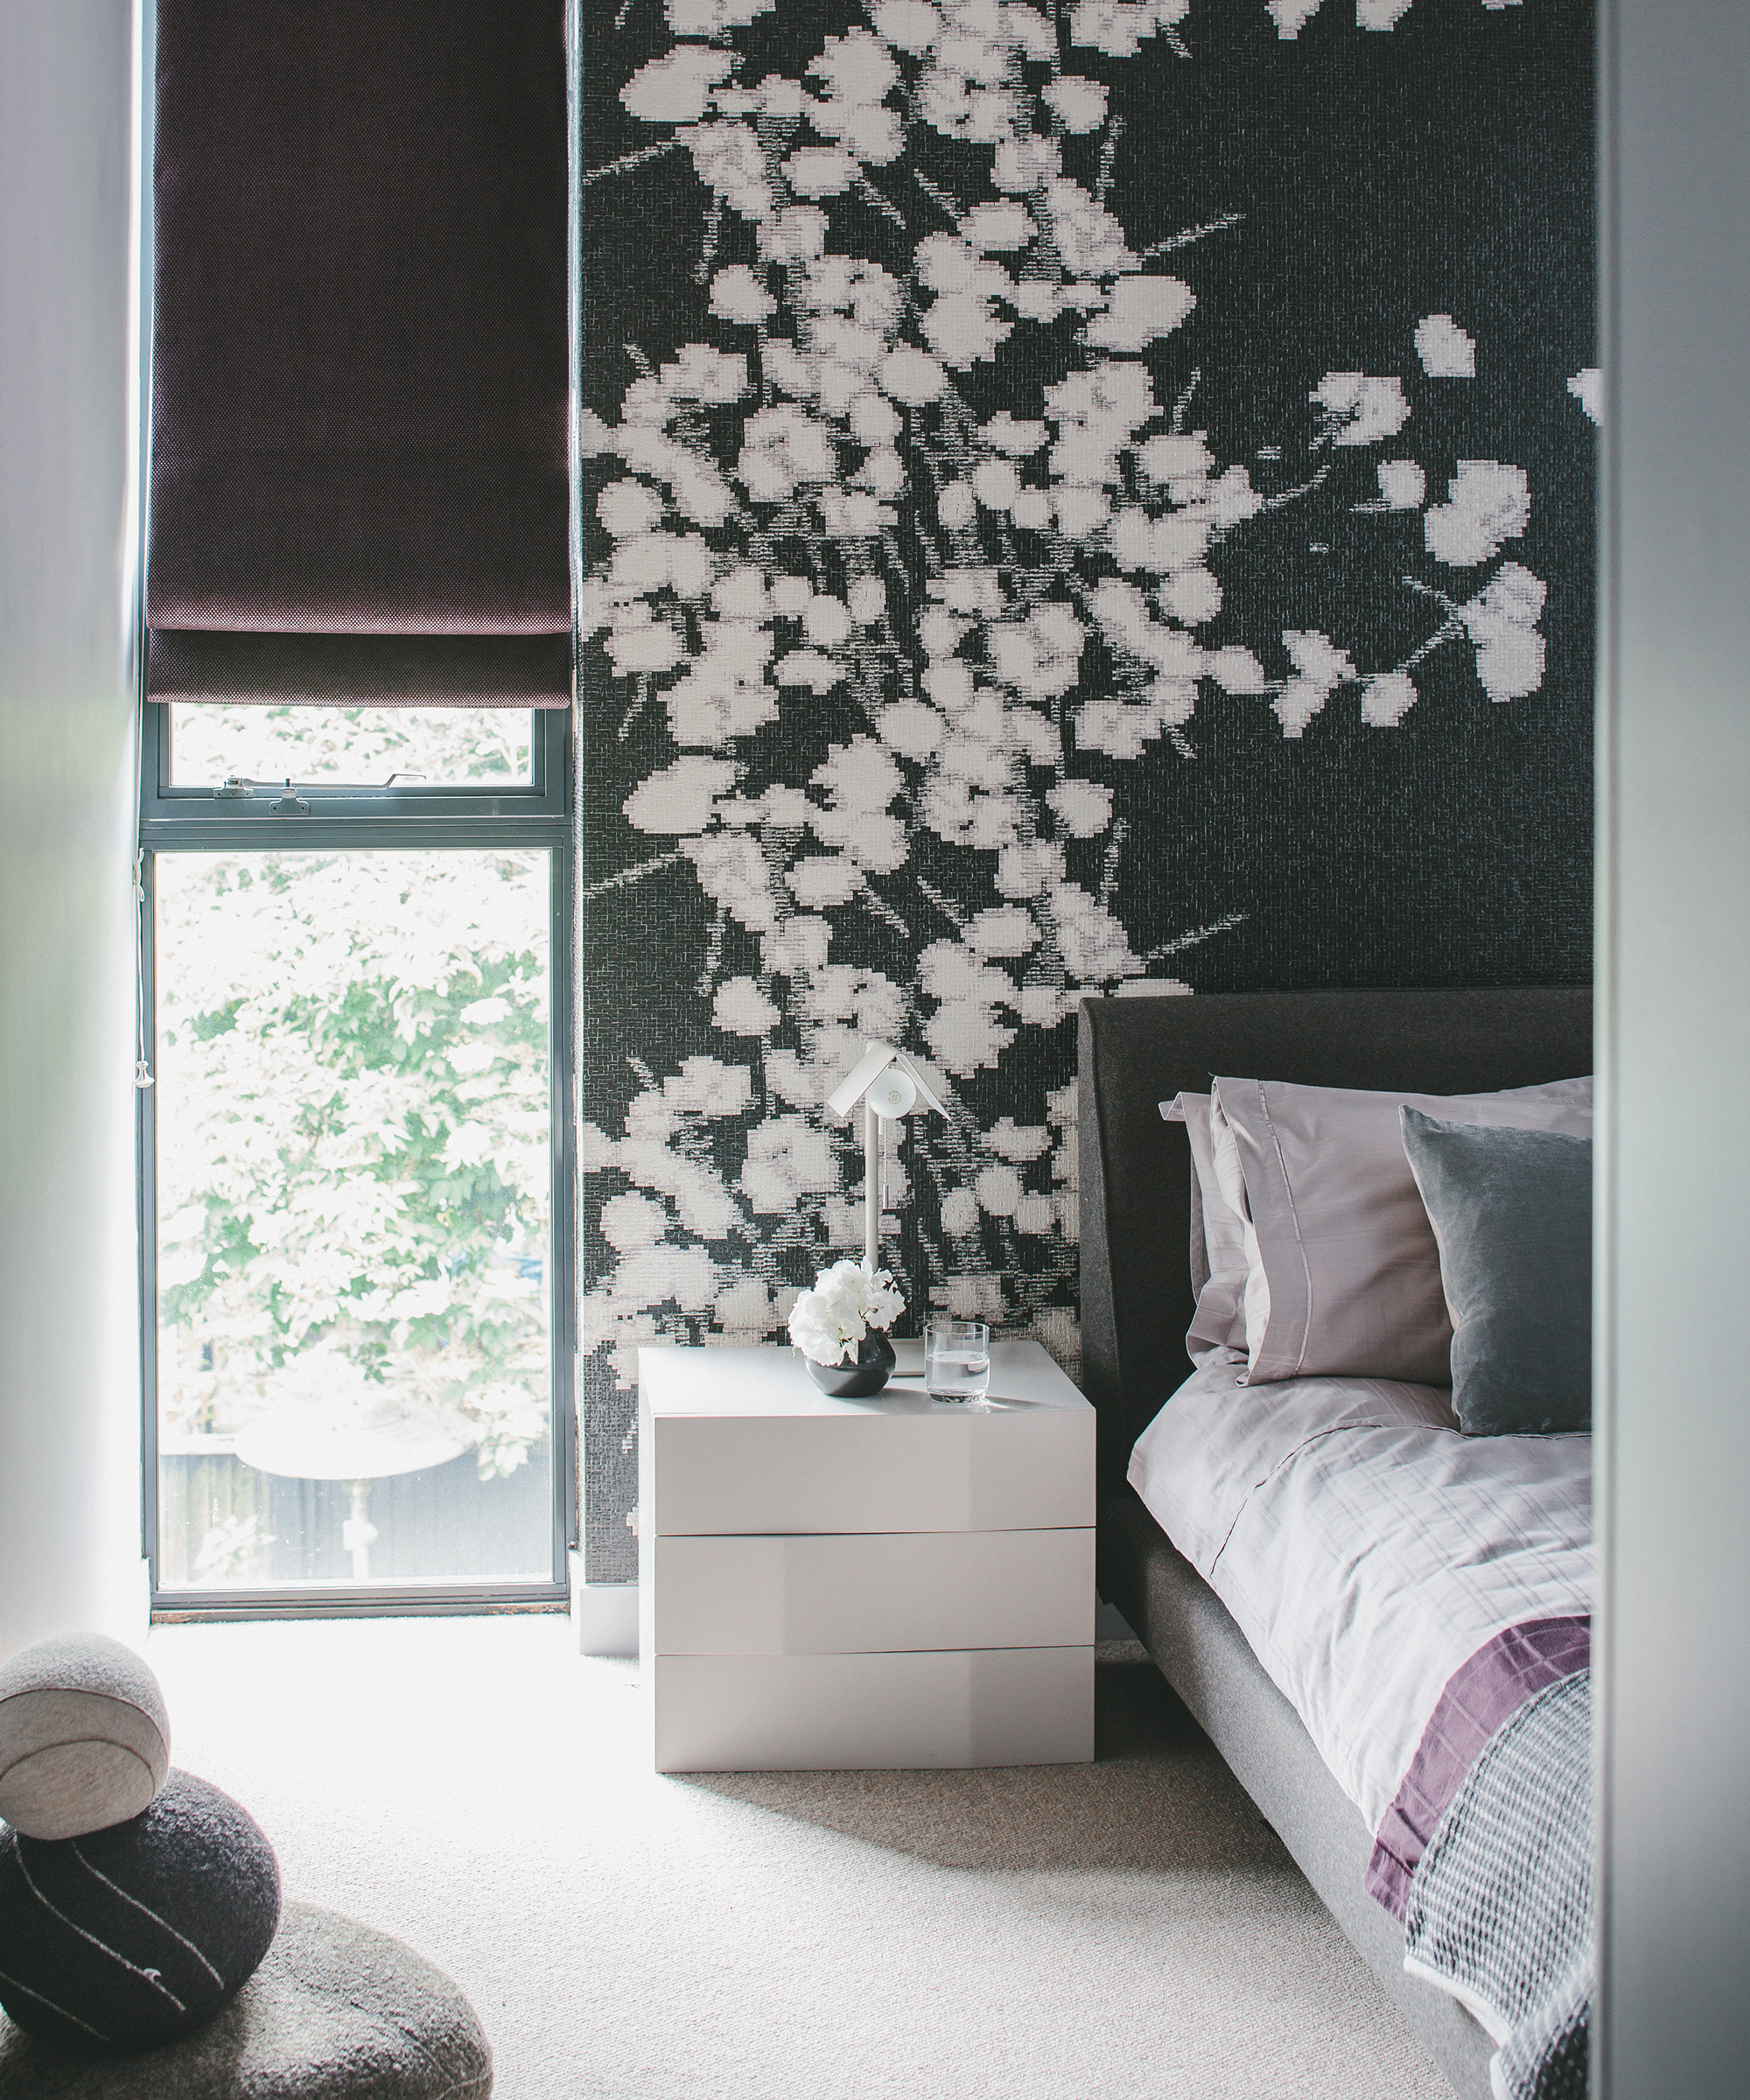 A bedroom with a floor to ceiling window next to a black and white floral wall mural